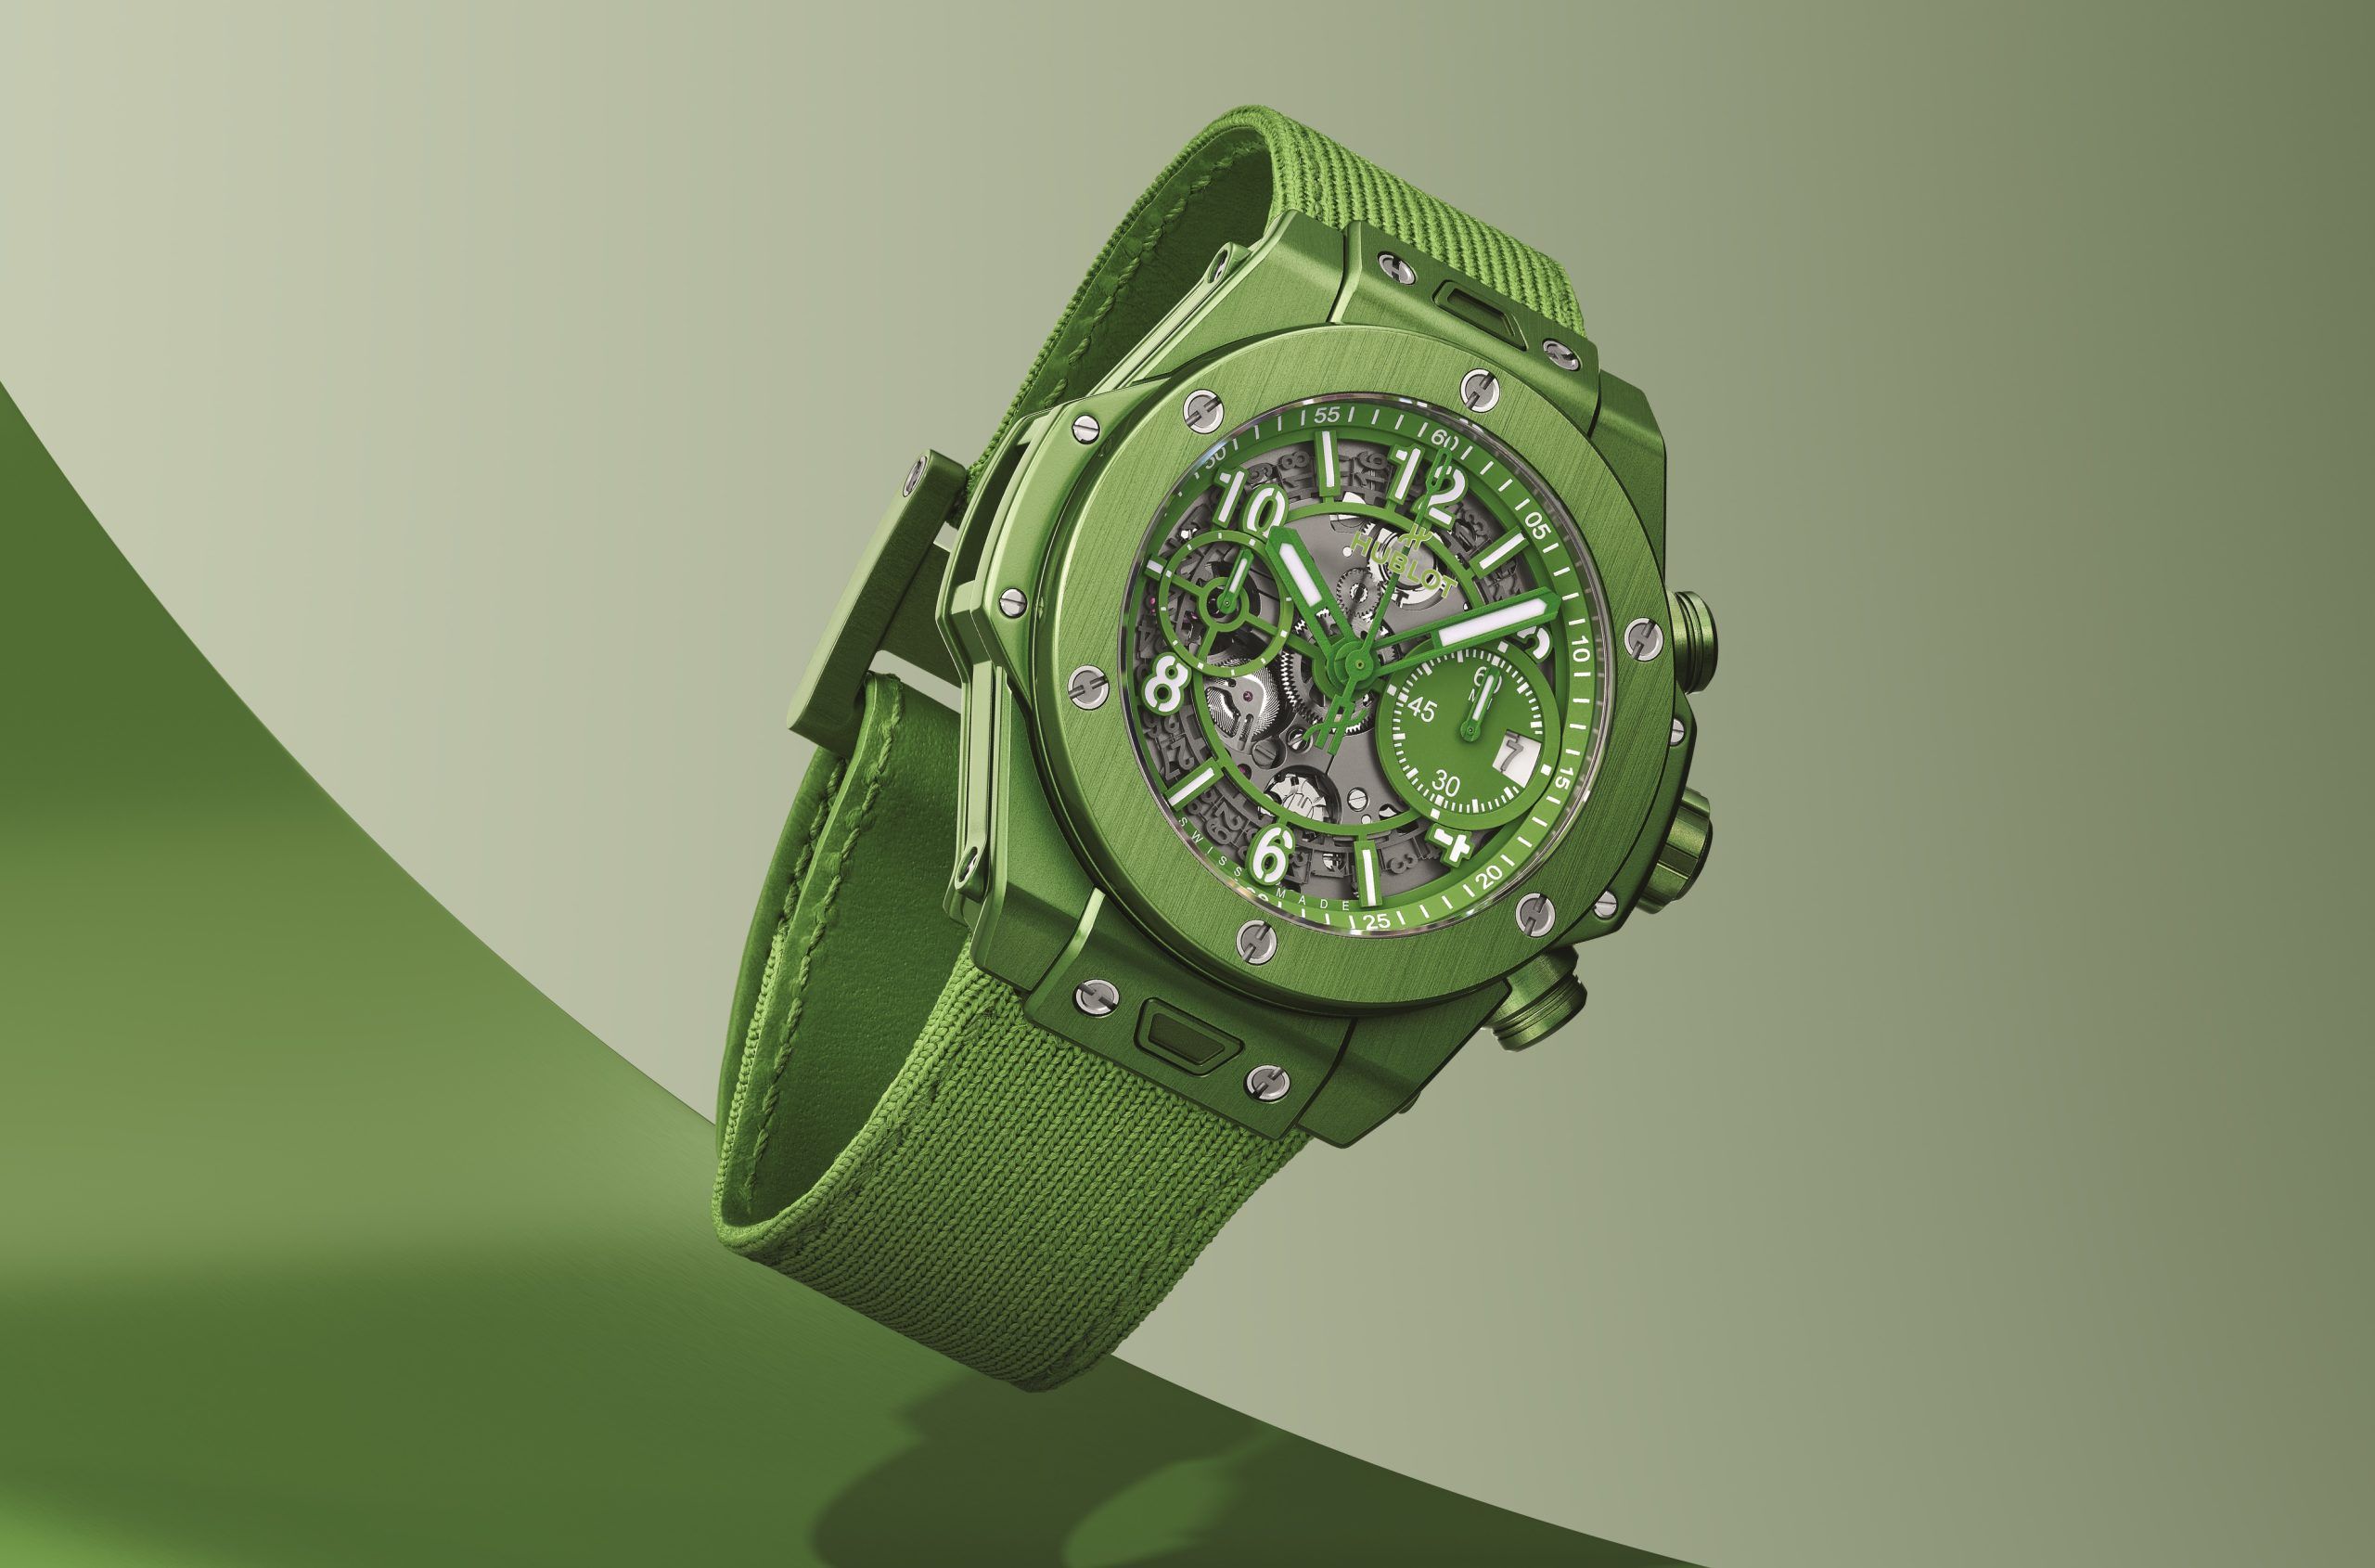 Hublot Teams With Nespresso For Limited Big Bang Unico